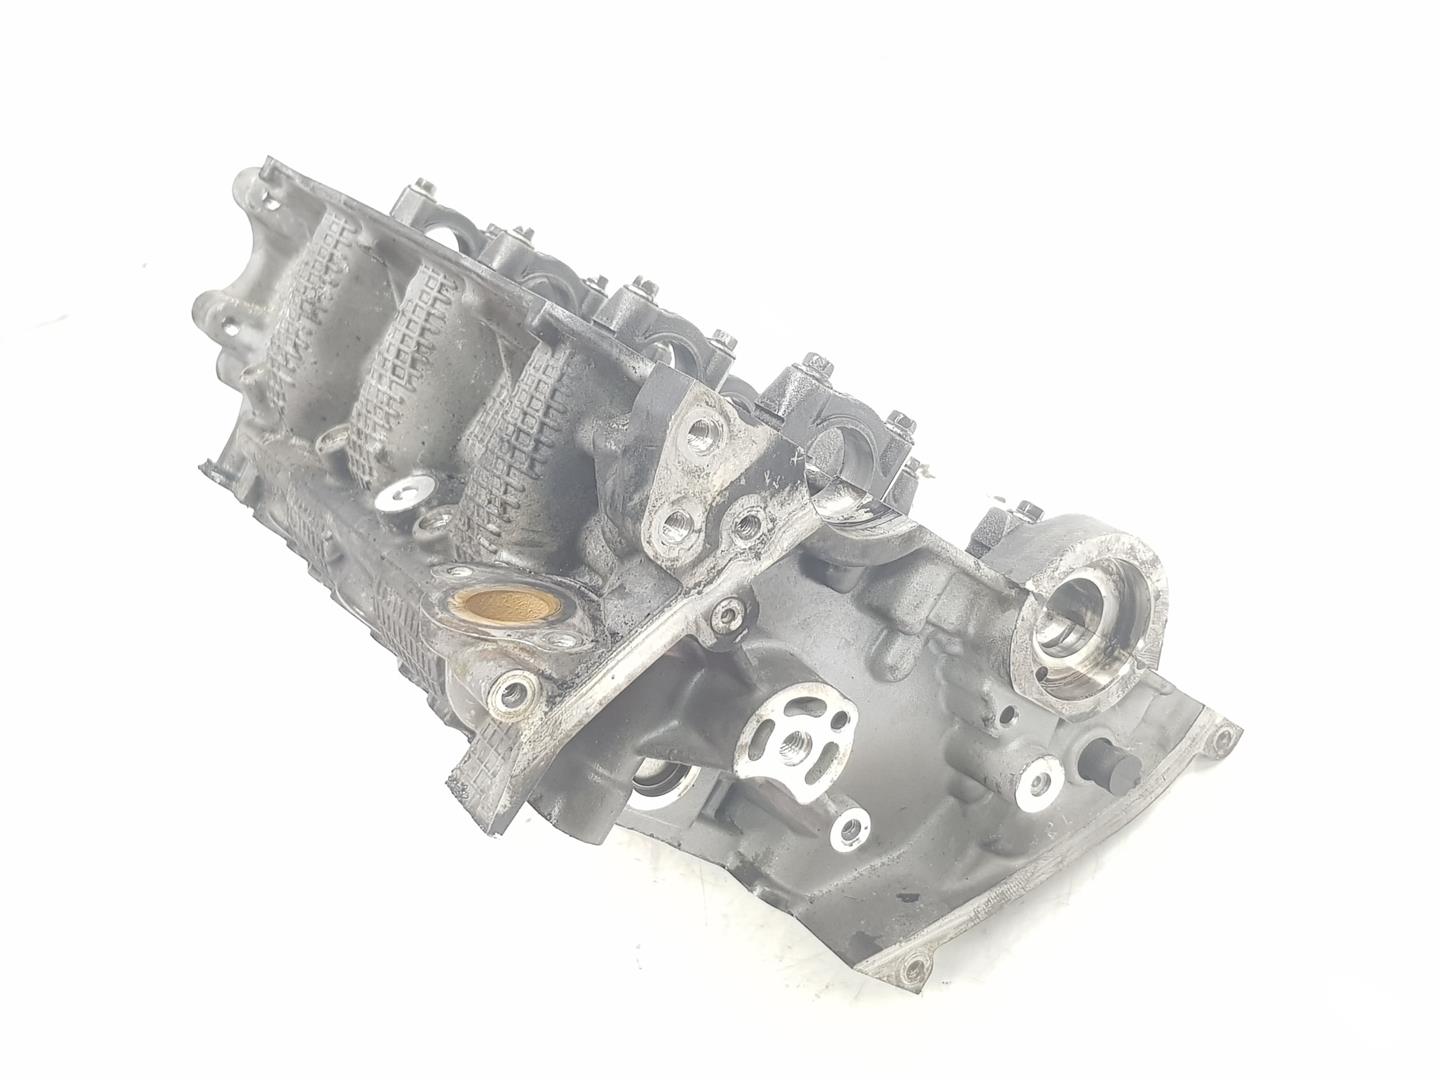 LAND ROVER Discovery 3 generation (2004-2009) Engine Cylinder Head 1311303, 1311303, 1111AA 24238316